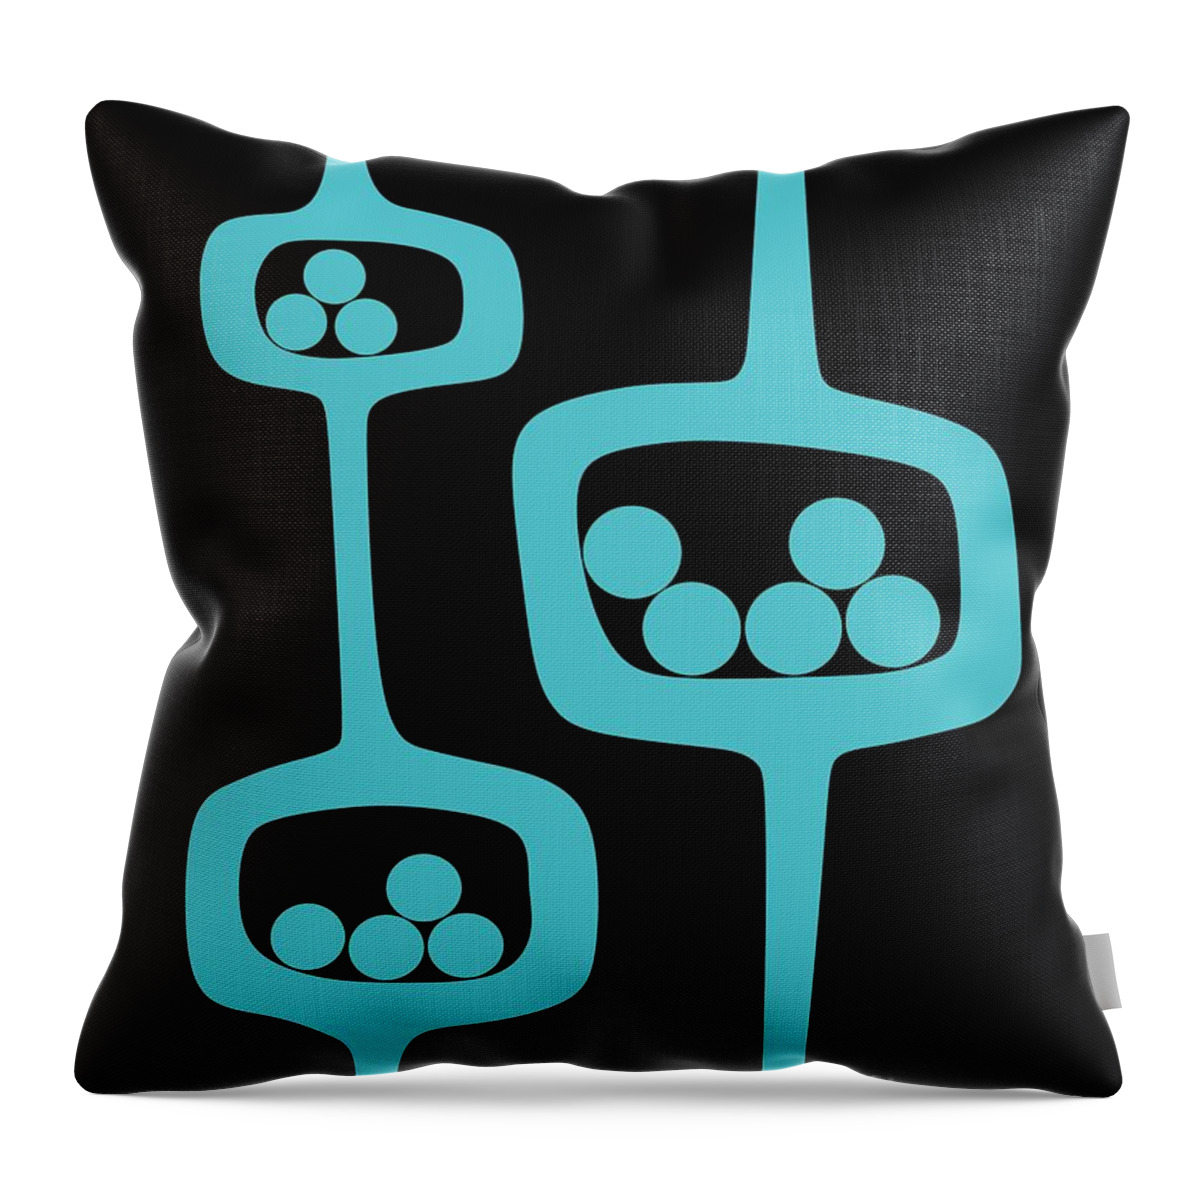 Abstract Throw Pillow featuring the digital art Turquoise Pods 2 by Donna Mibus